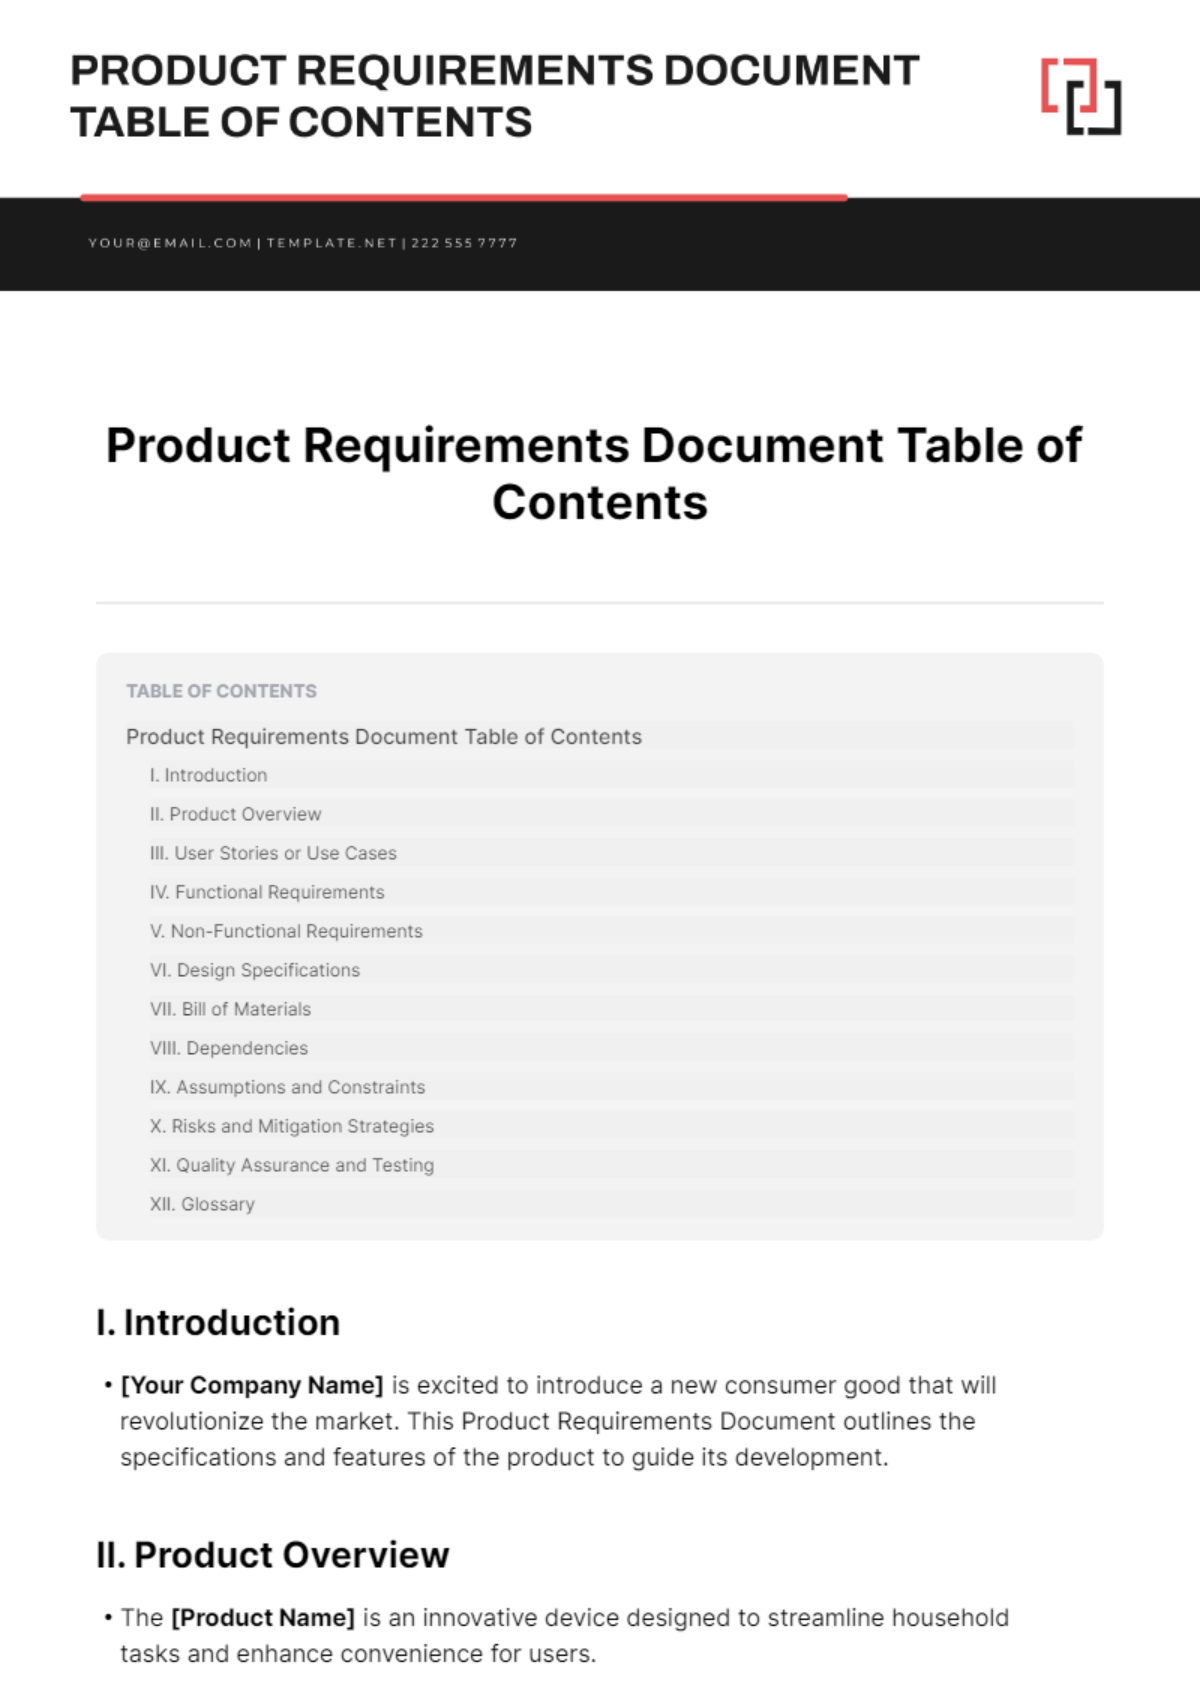 Product Requirements Document Table of Contents Template